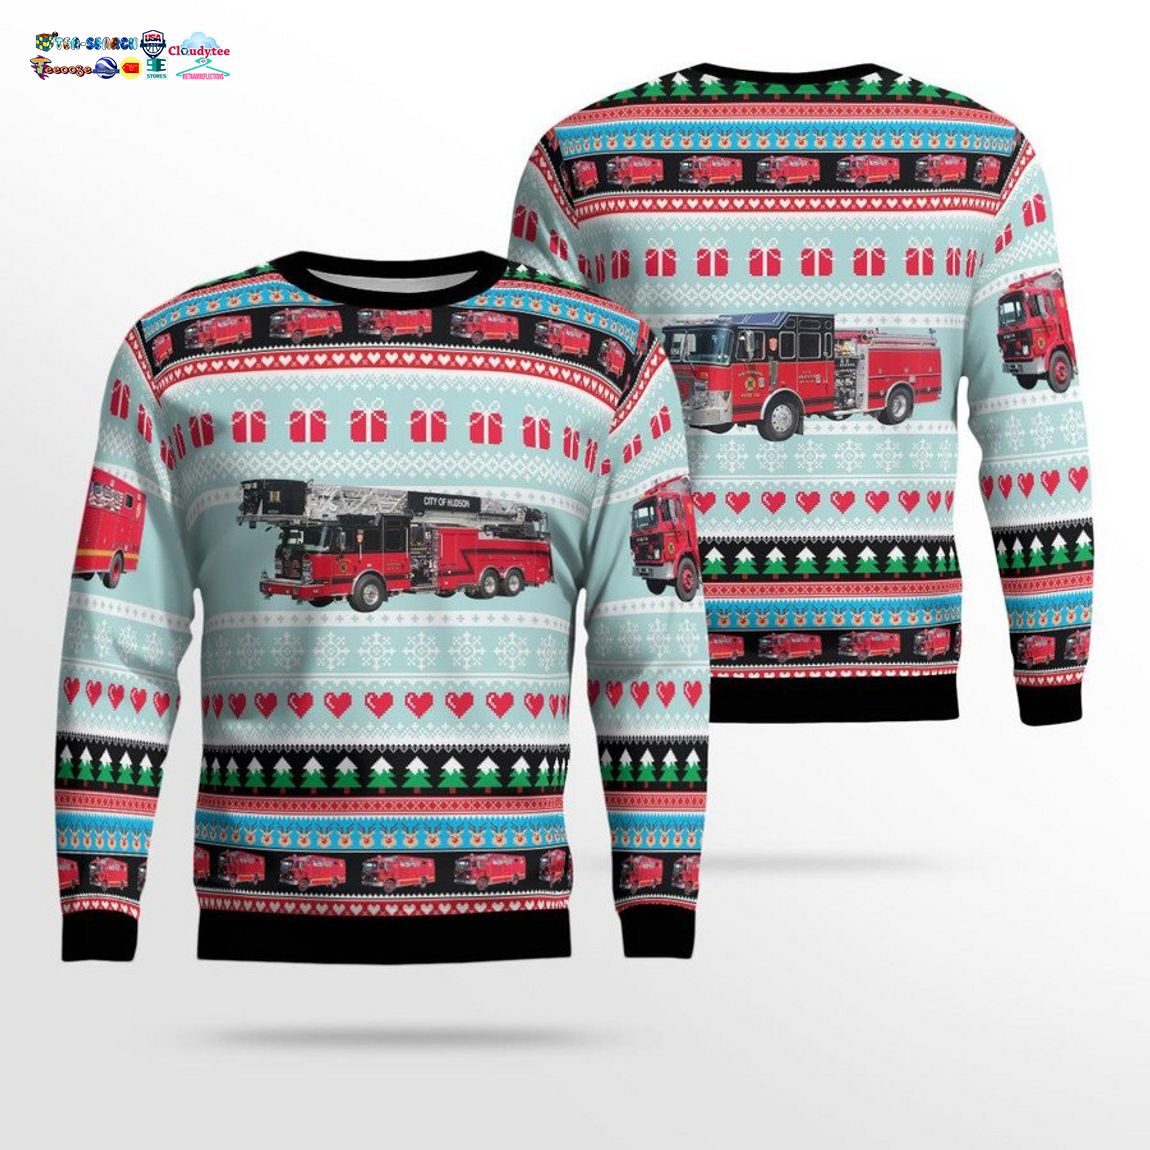 New York City of Hudson Fire Department 3D Christmas Sweater - Rocking picture